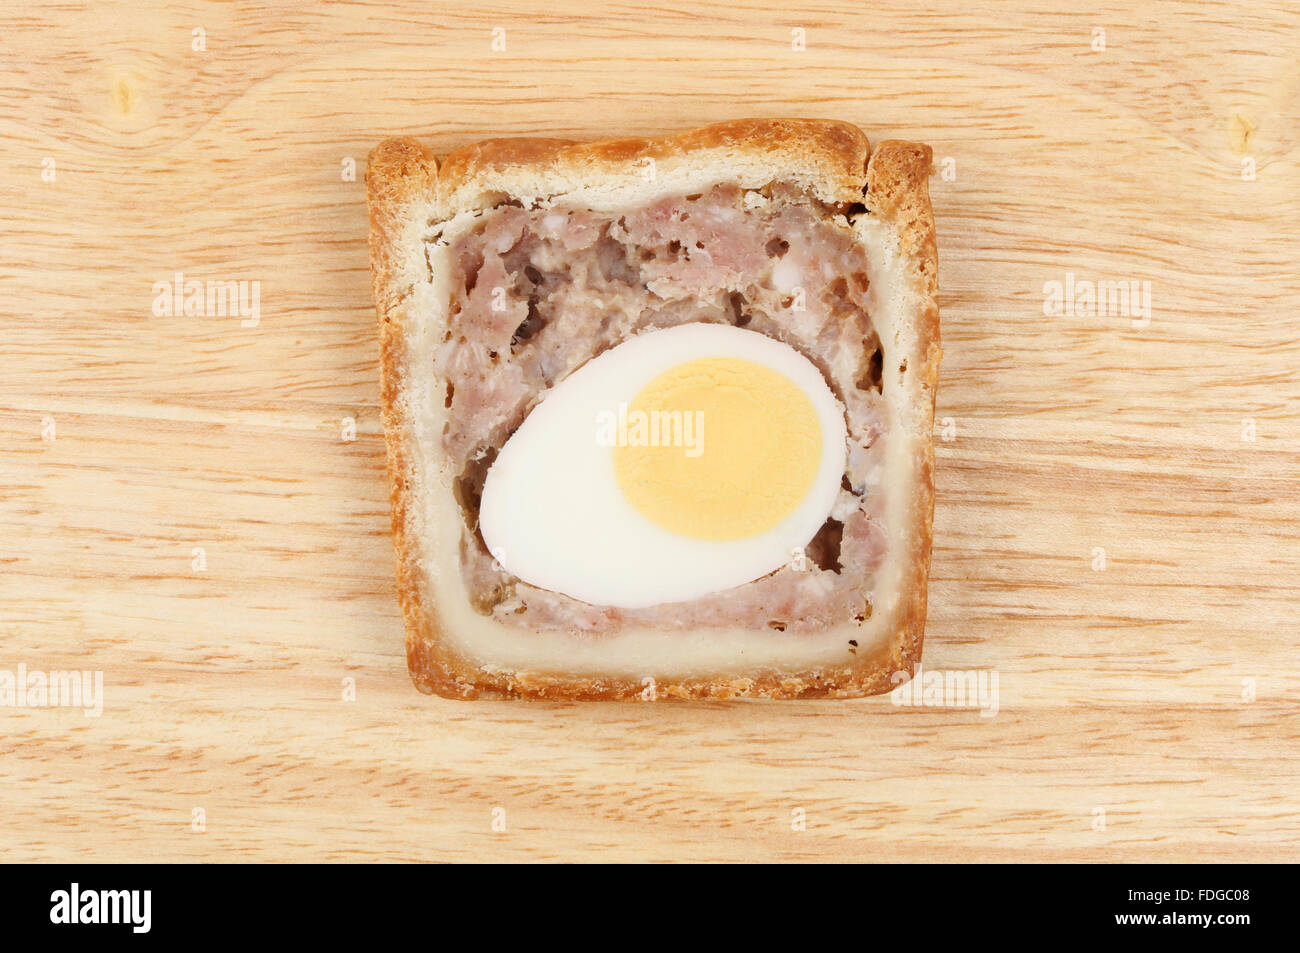 Slice of pork and egg gala pie on a wooden board Stock Photo